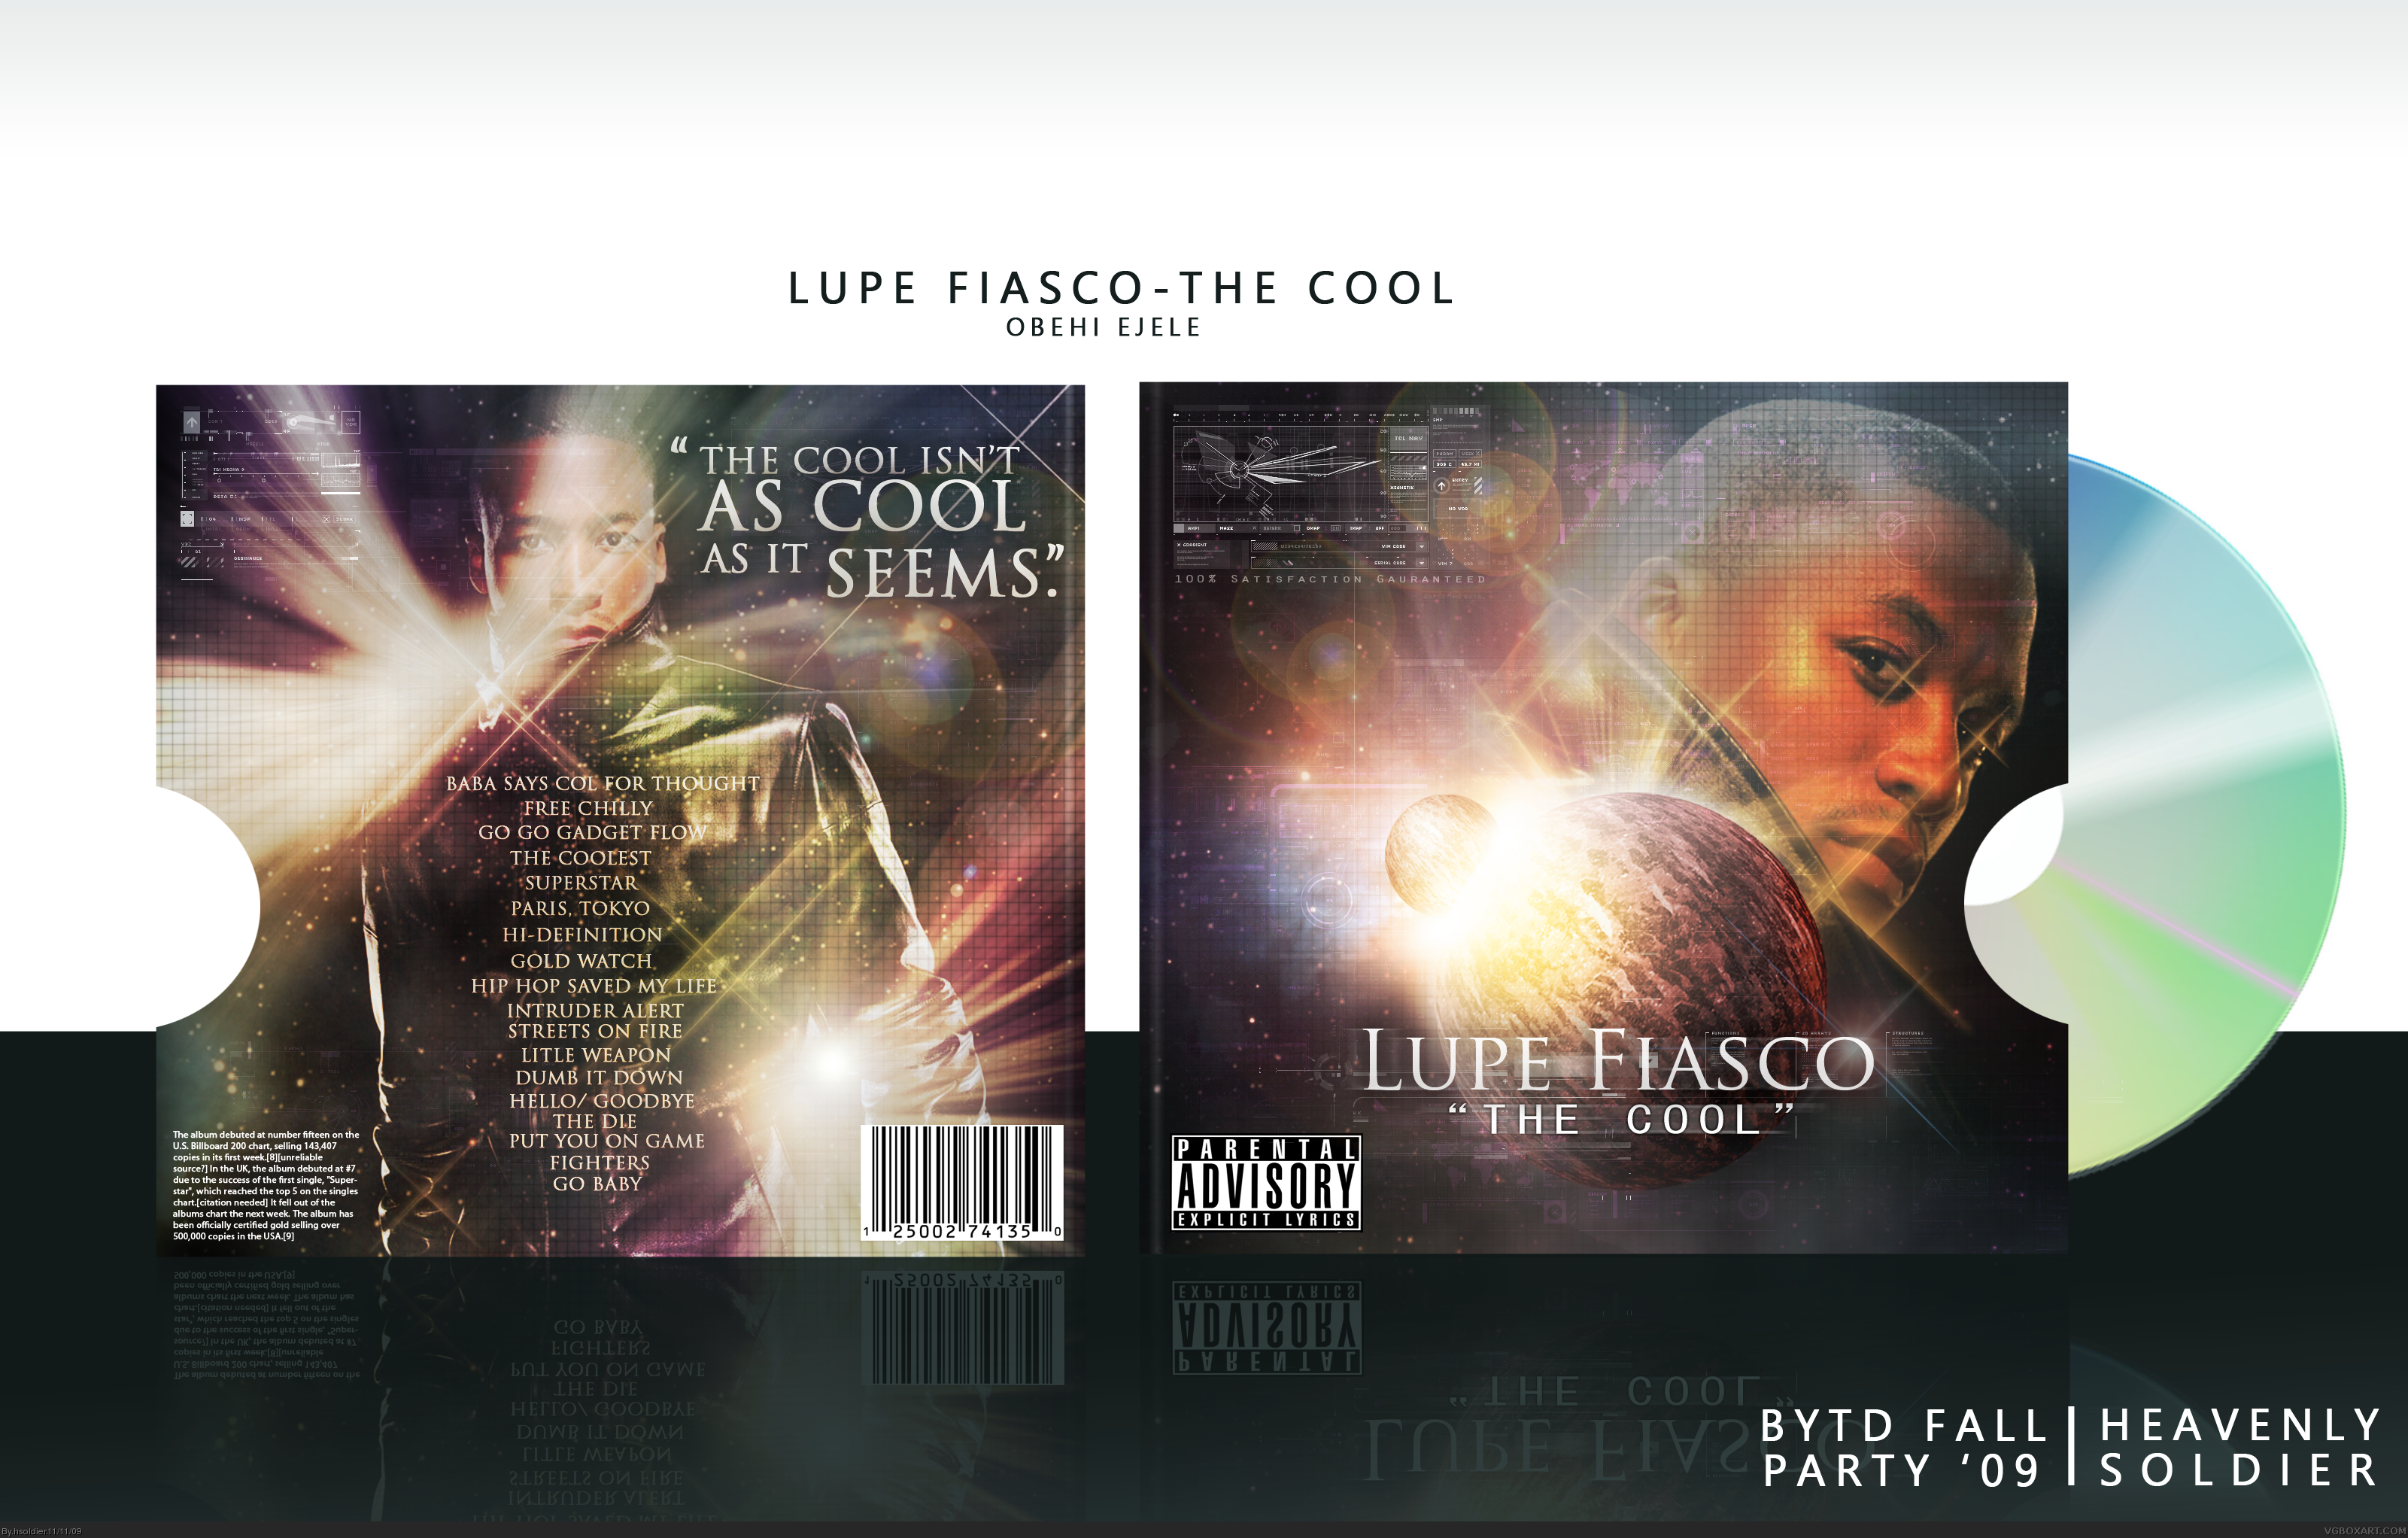 Lupe Fiasco: The Cool box cover